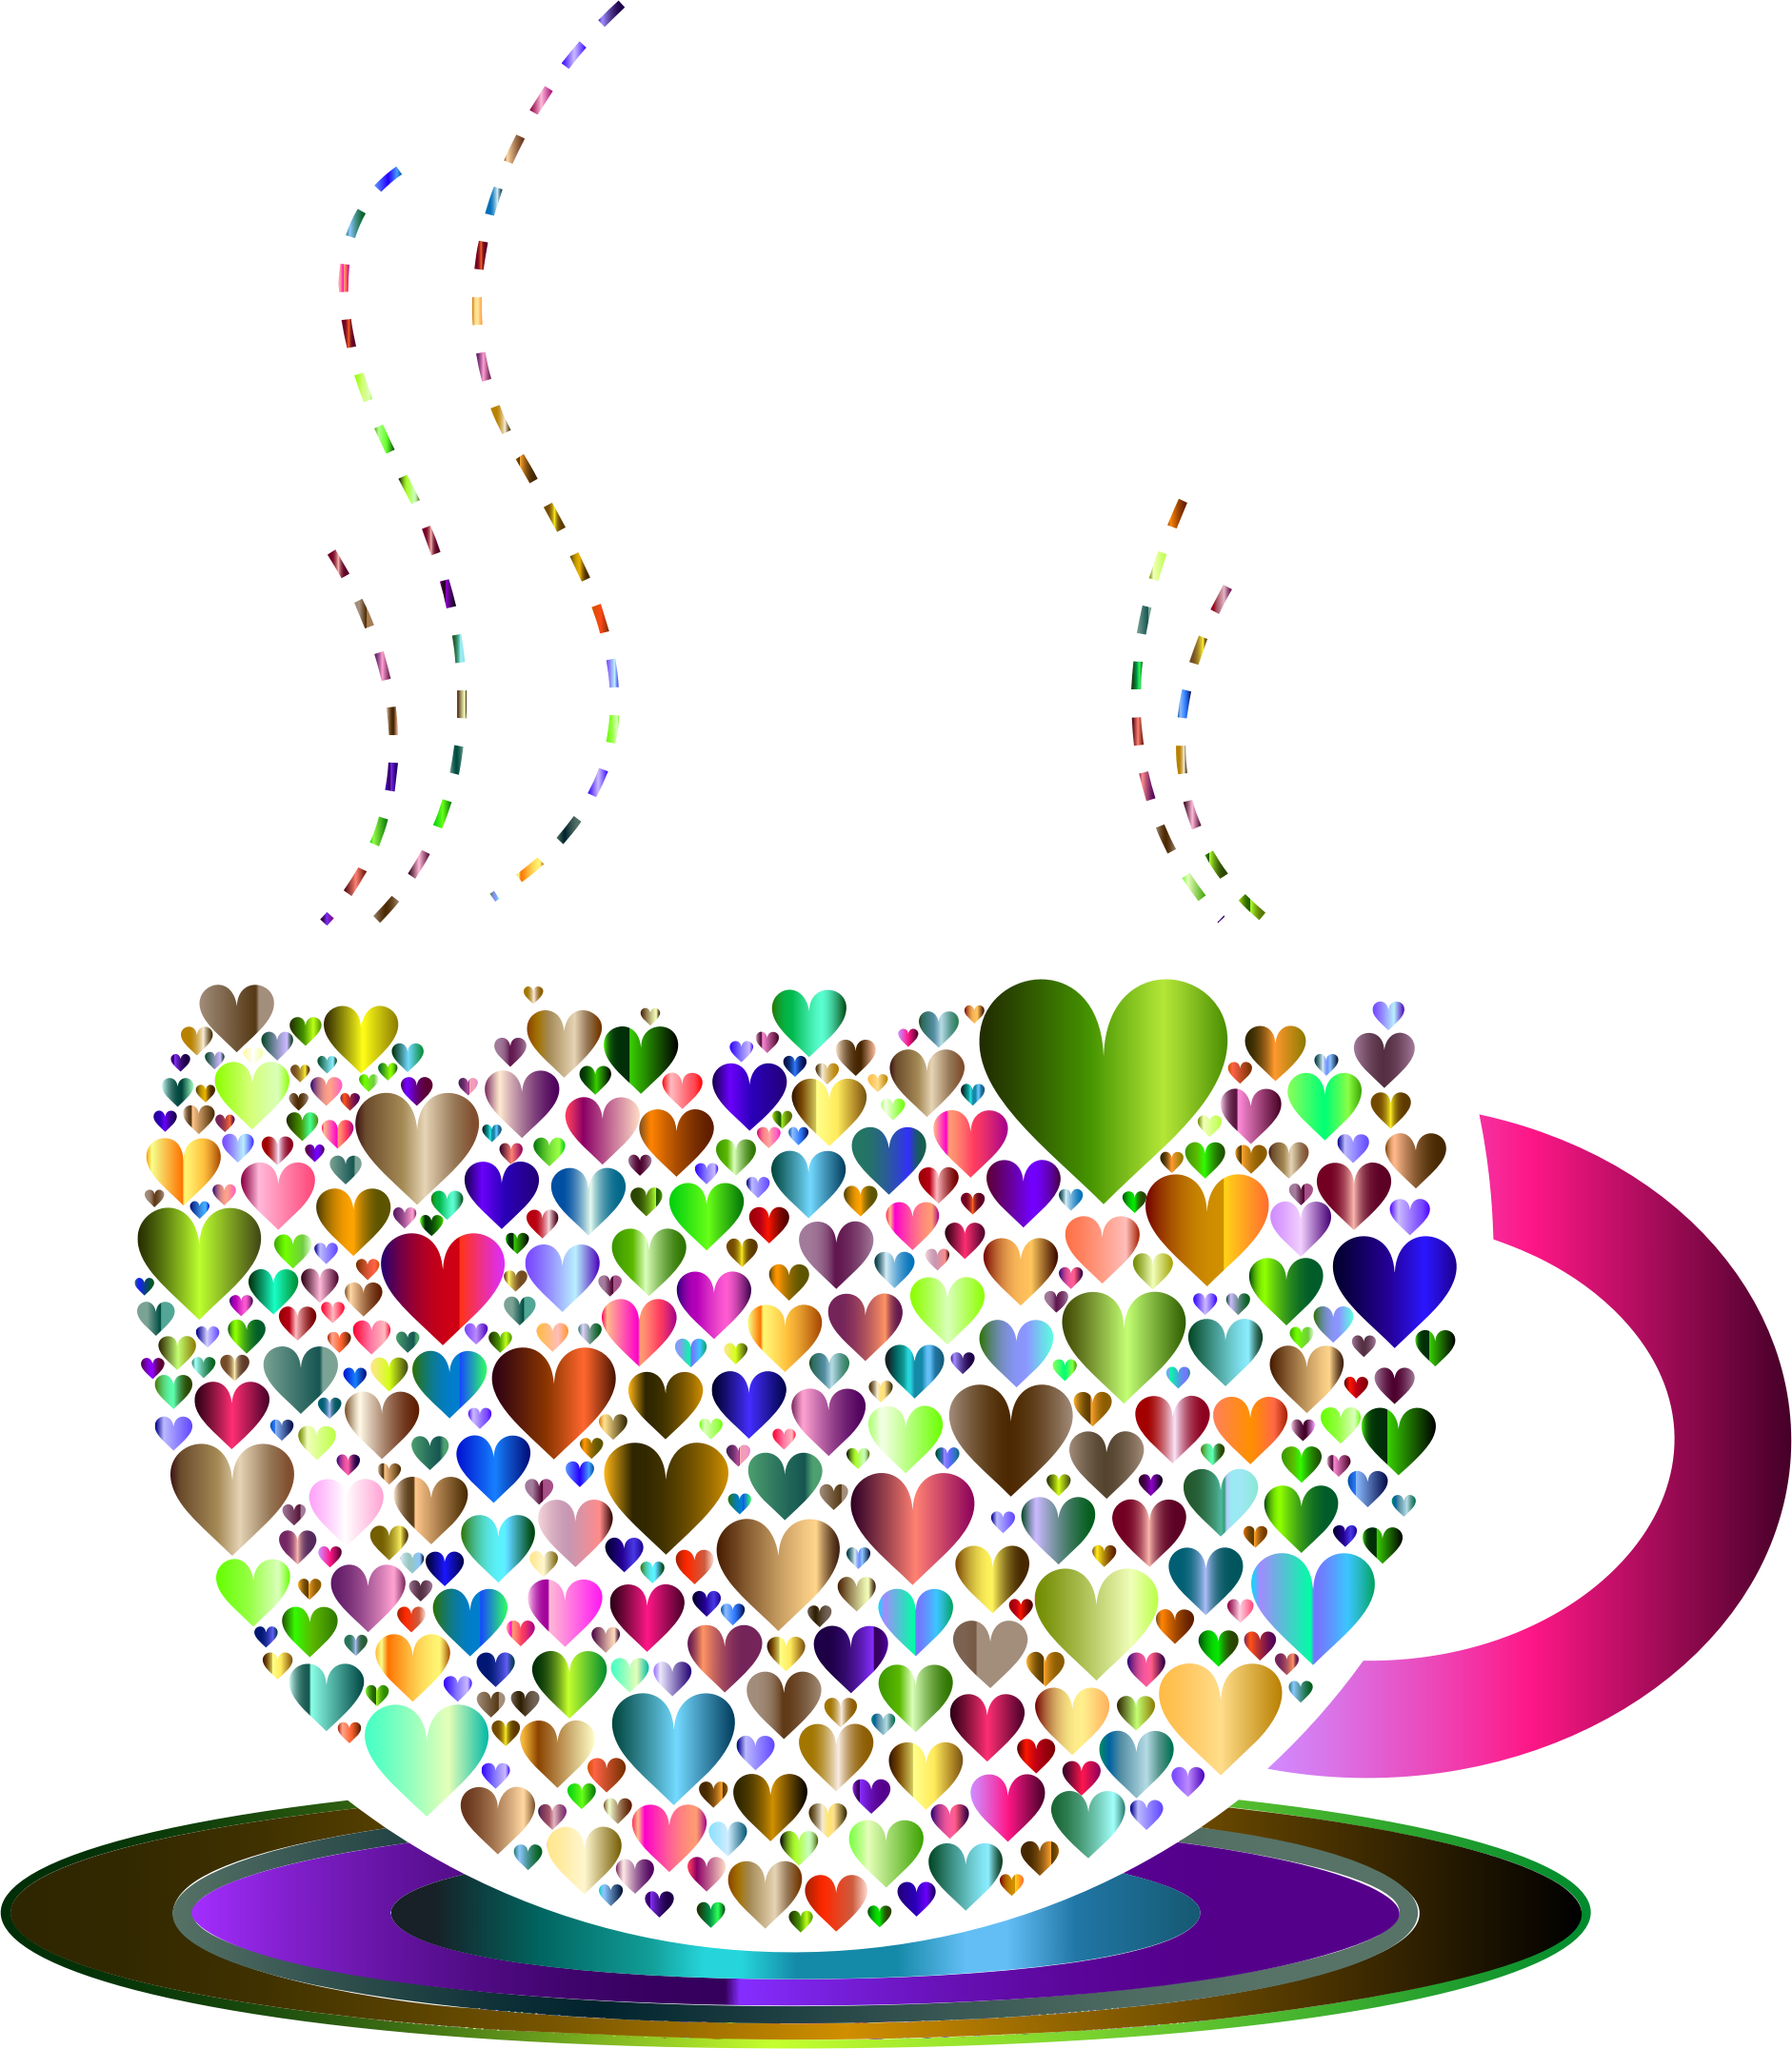 Coffee clipart heart, Coffee heart Transparent FREE for